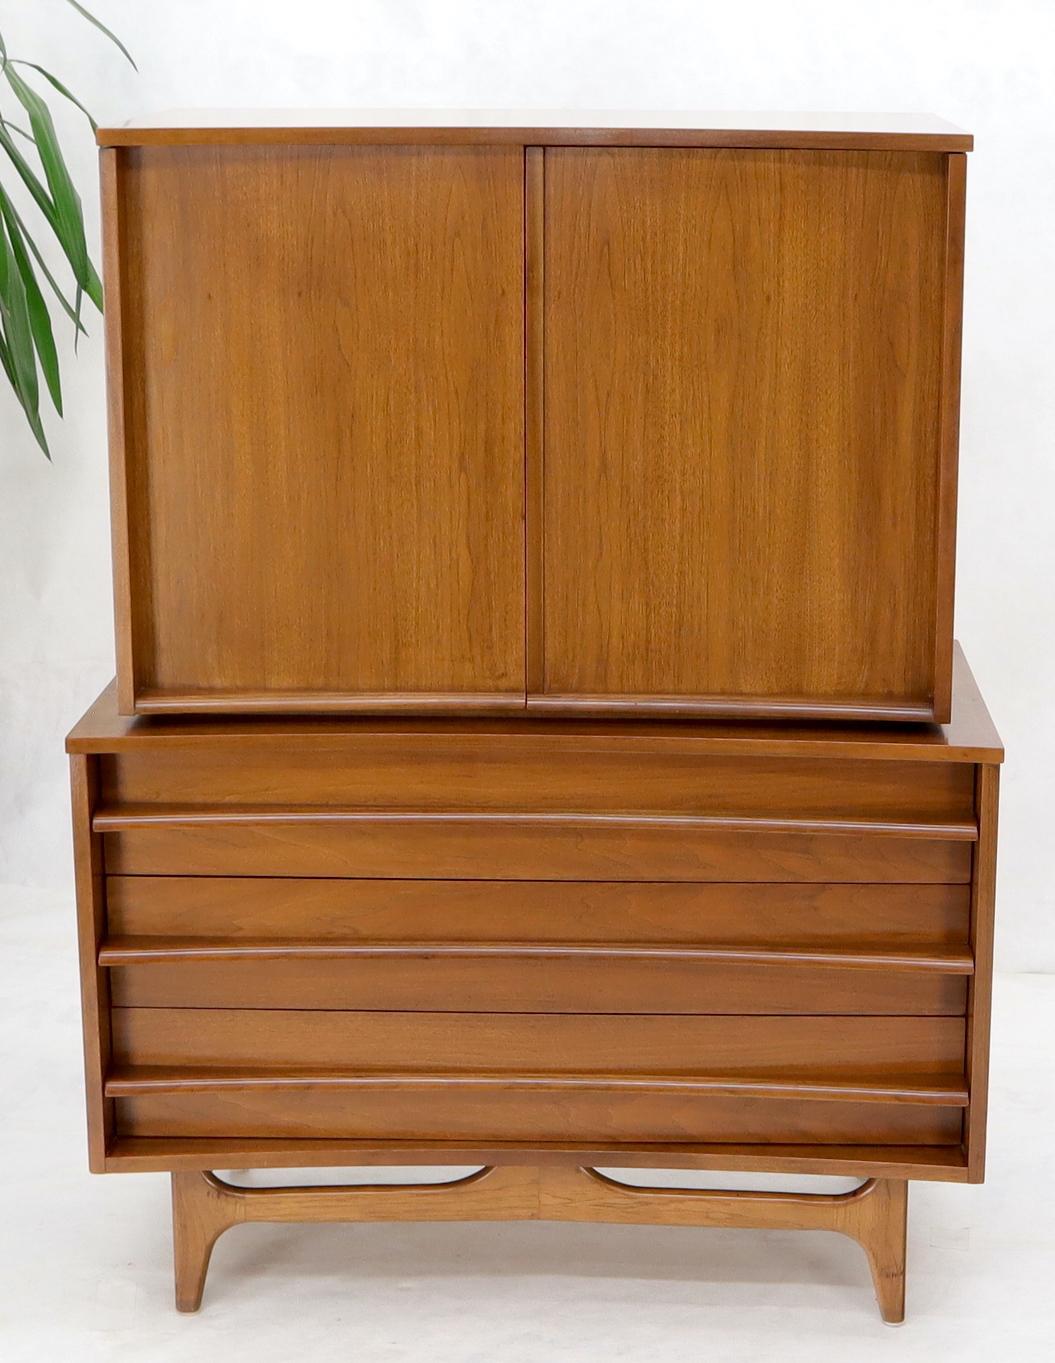 Mid-Century Modern American walnut high chest dresser with double doors compartment.